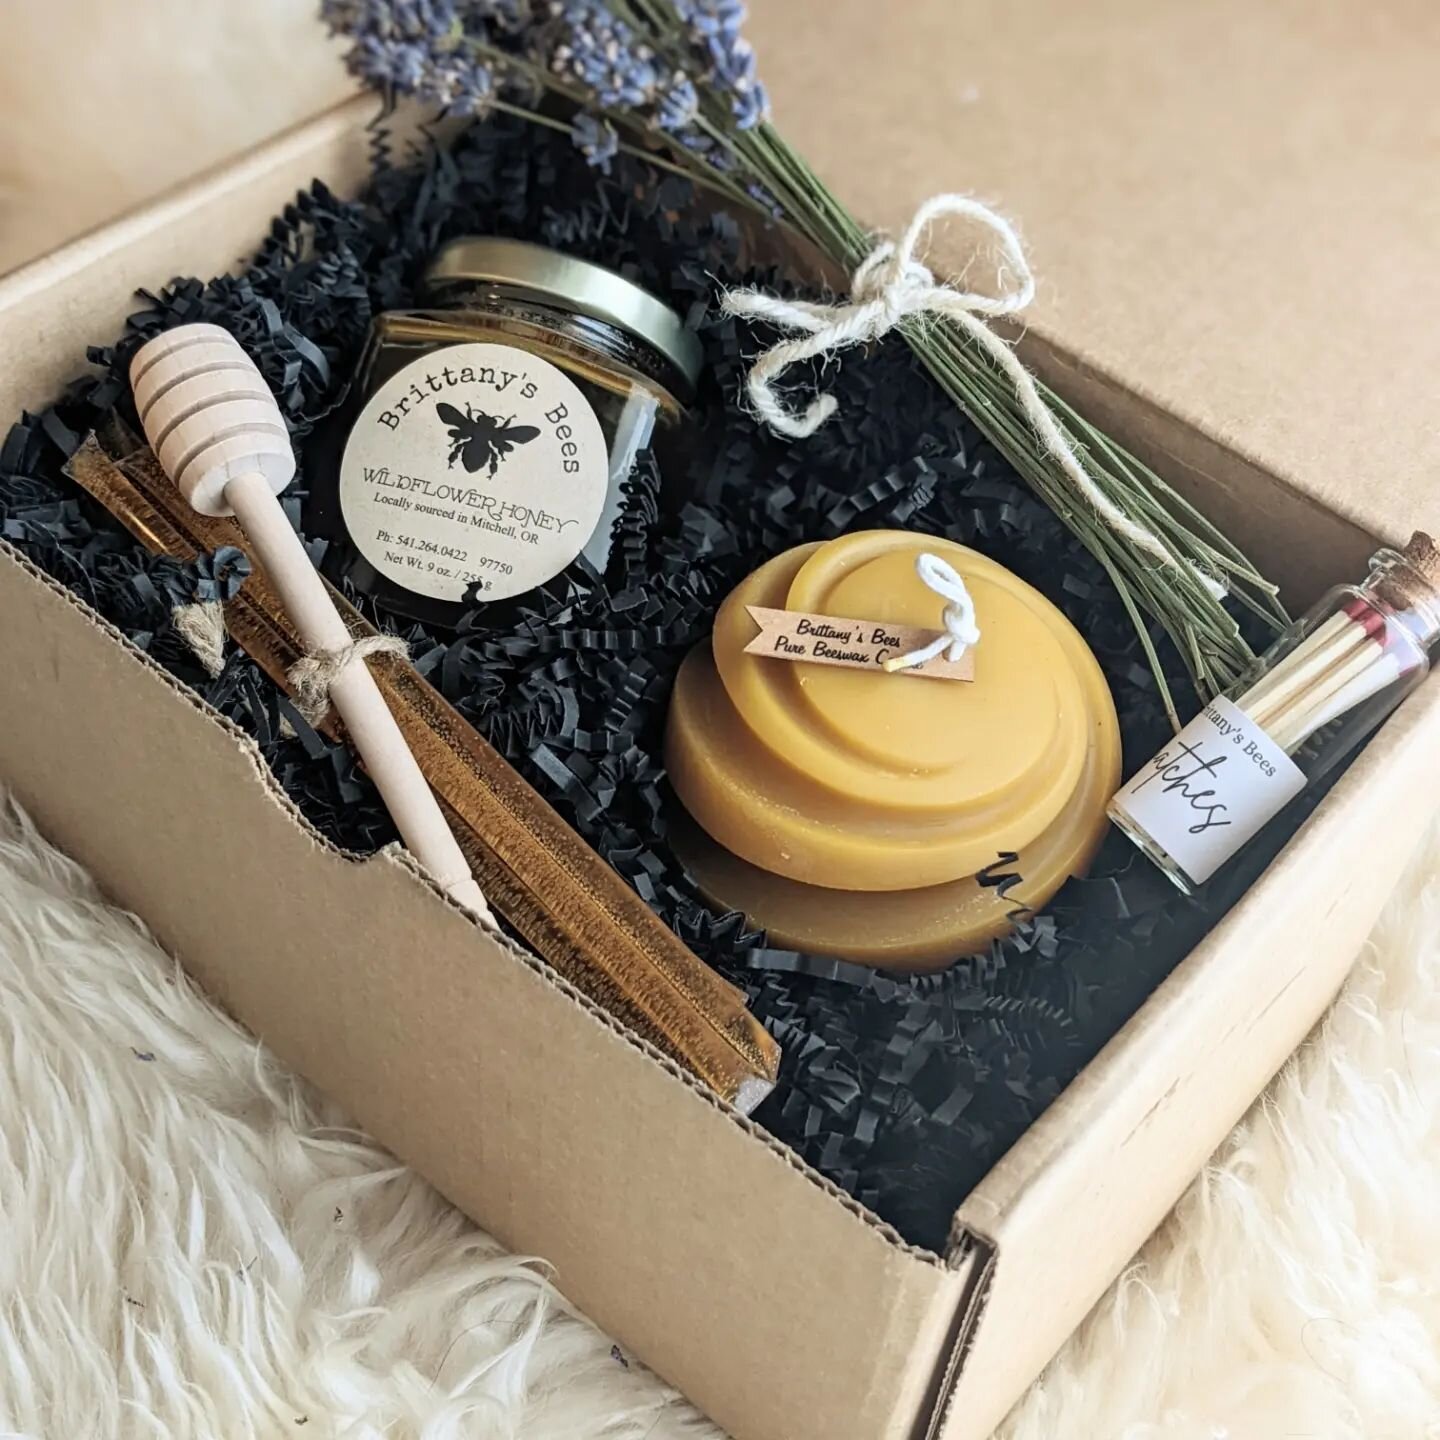 Holiday season is here and only 20 days until Christmas! 😳

We have the perfect handmade gift boxes for Christmas or any occasion. 

Contact me via messenger to order now. 🎄🐝🎄🐝